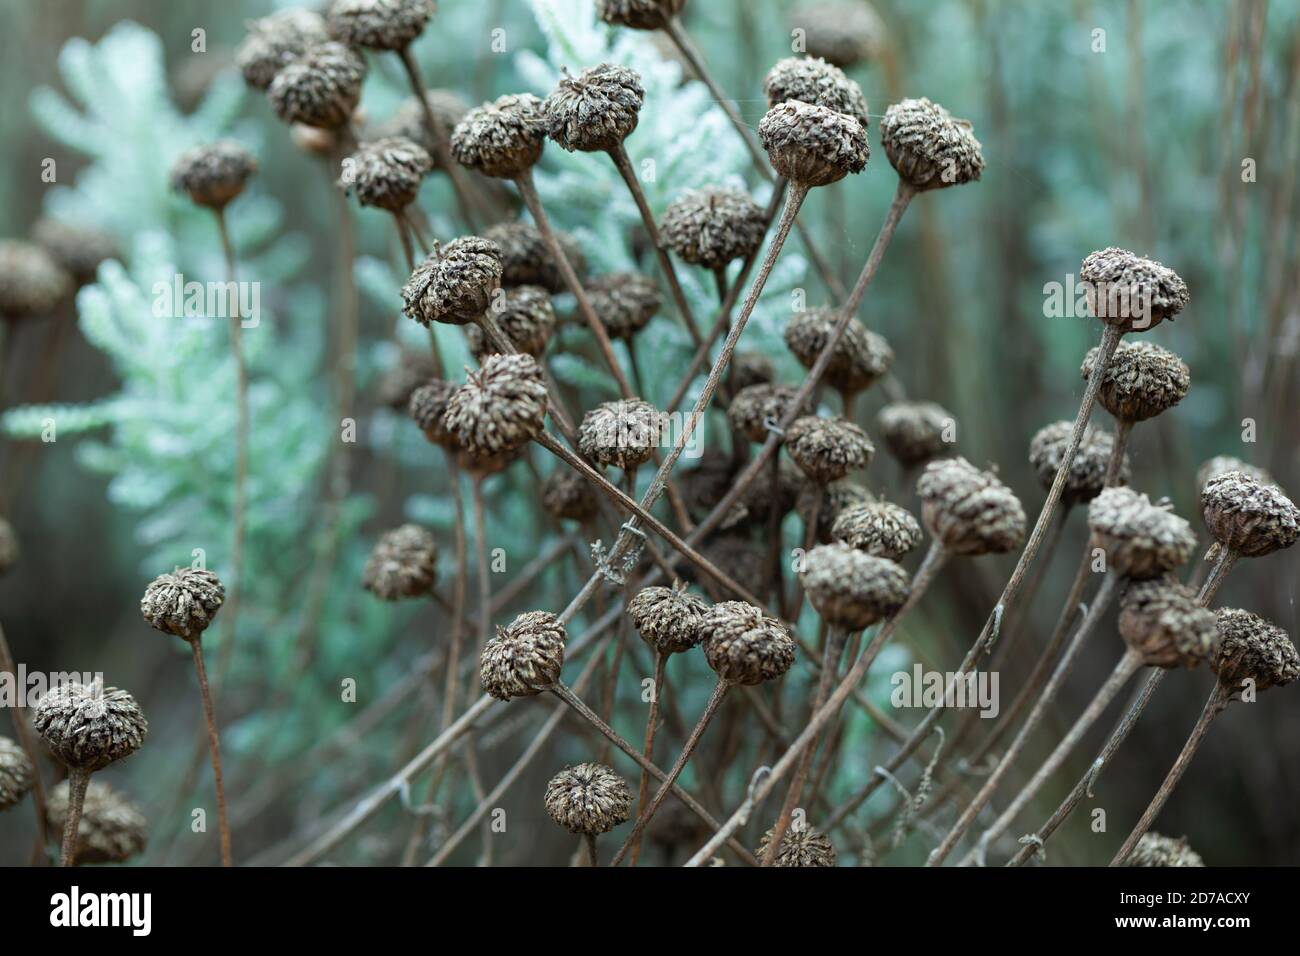 Garden Design Structure and Form / Natural Botanics concept - High-Resolution Close-up of seedheads in Autumn.  Green & Brown tones Stock Photo